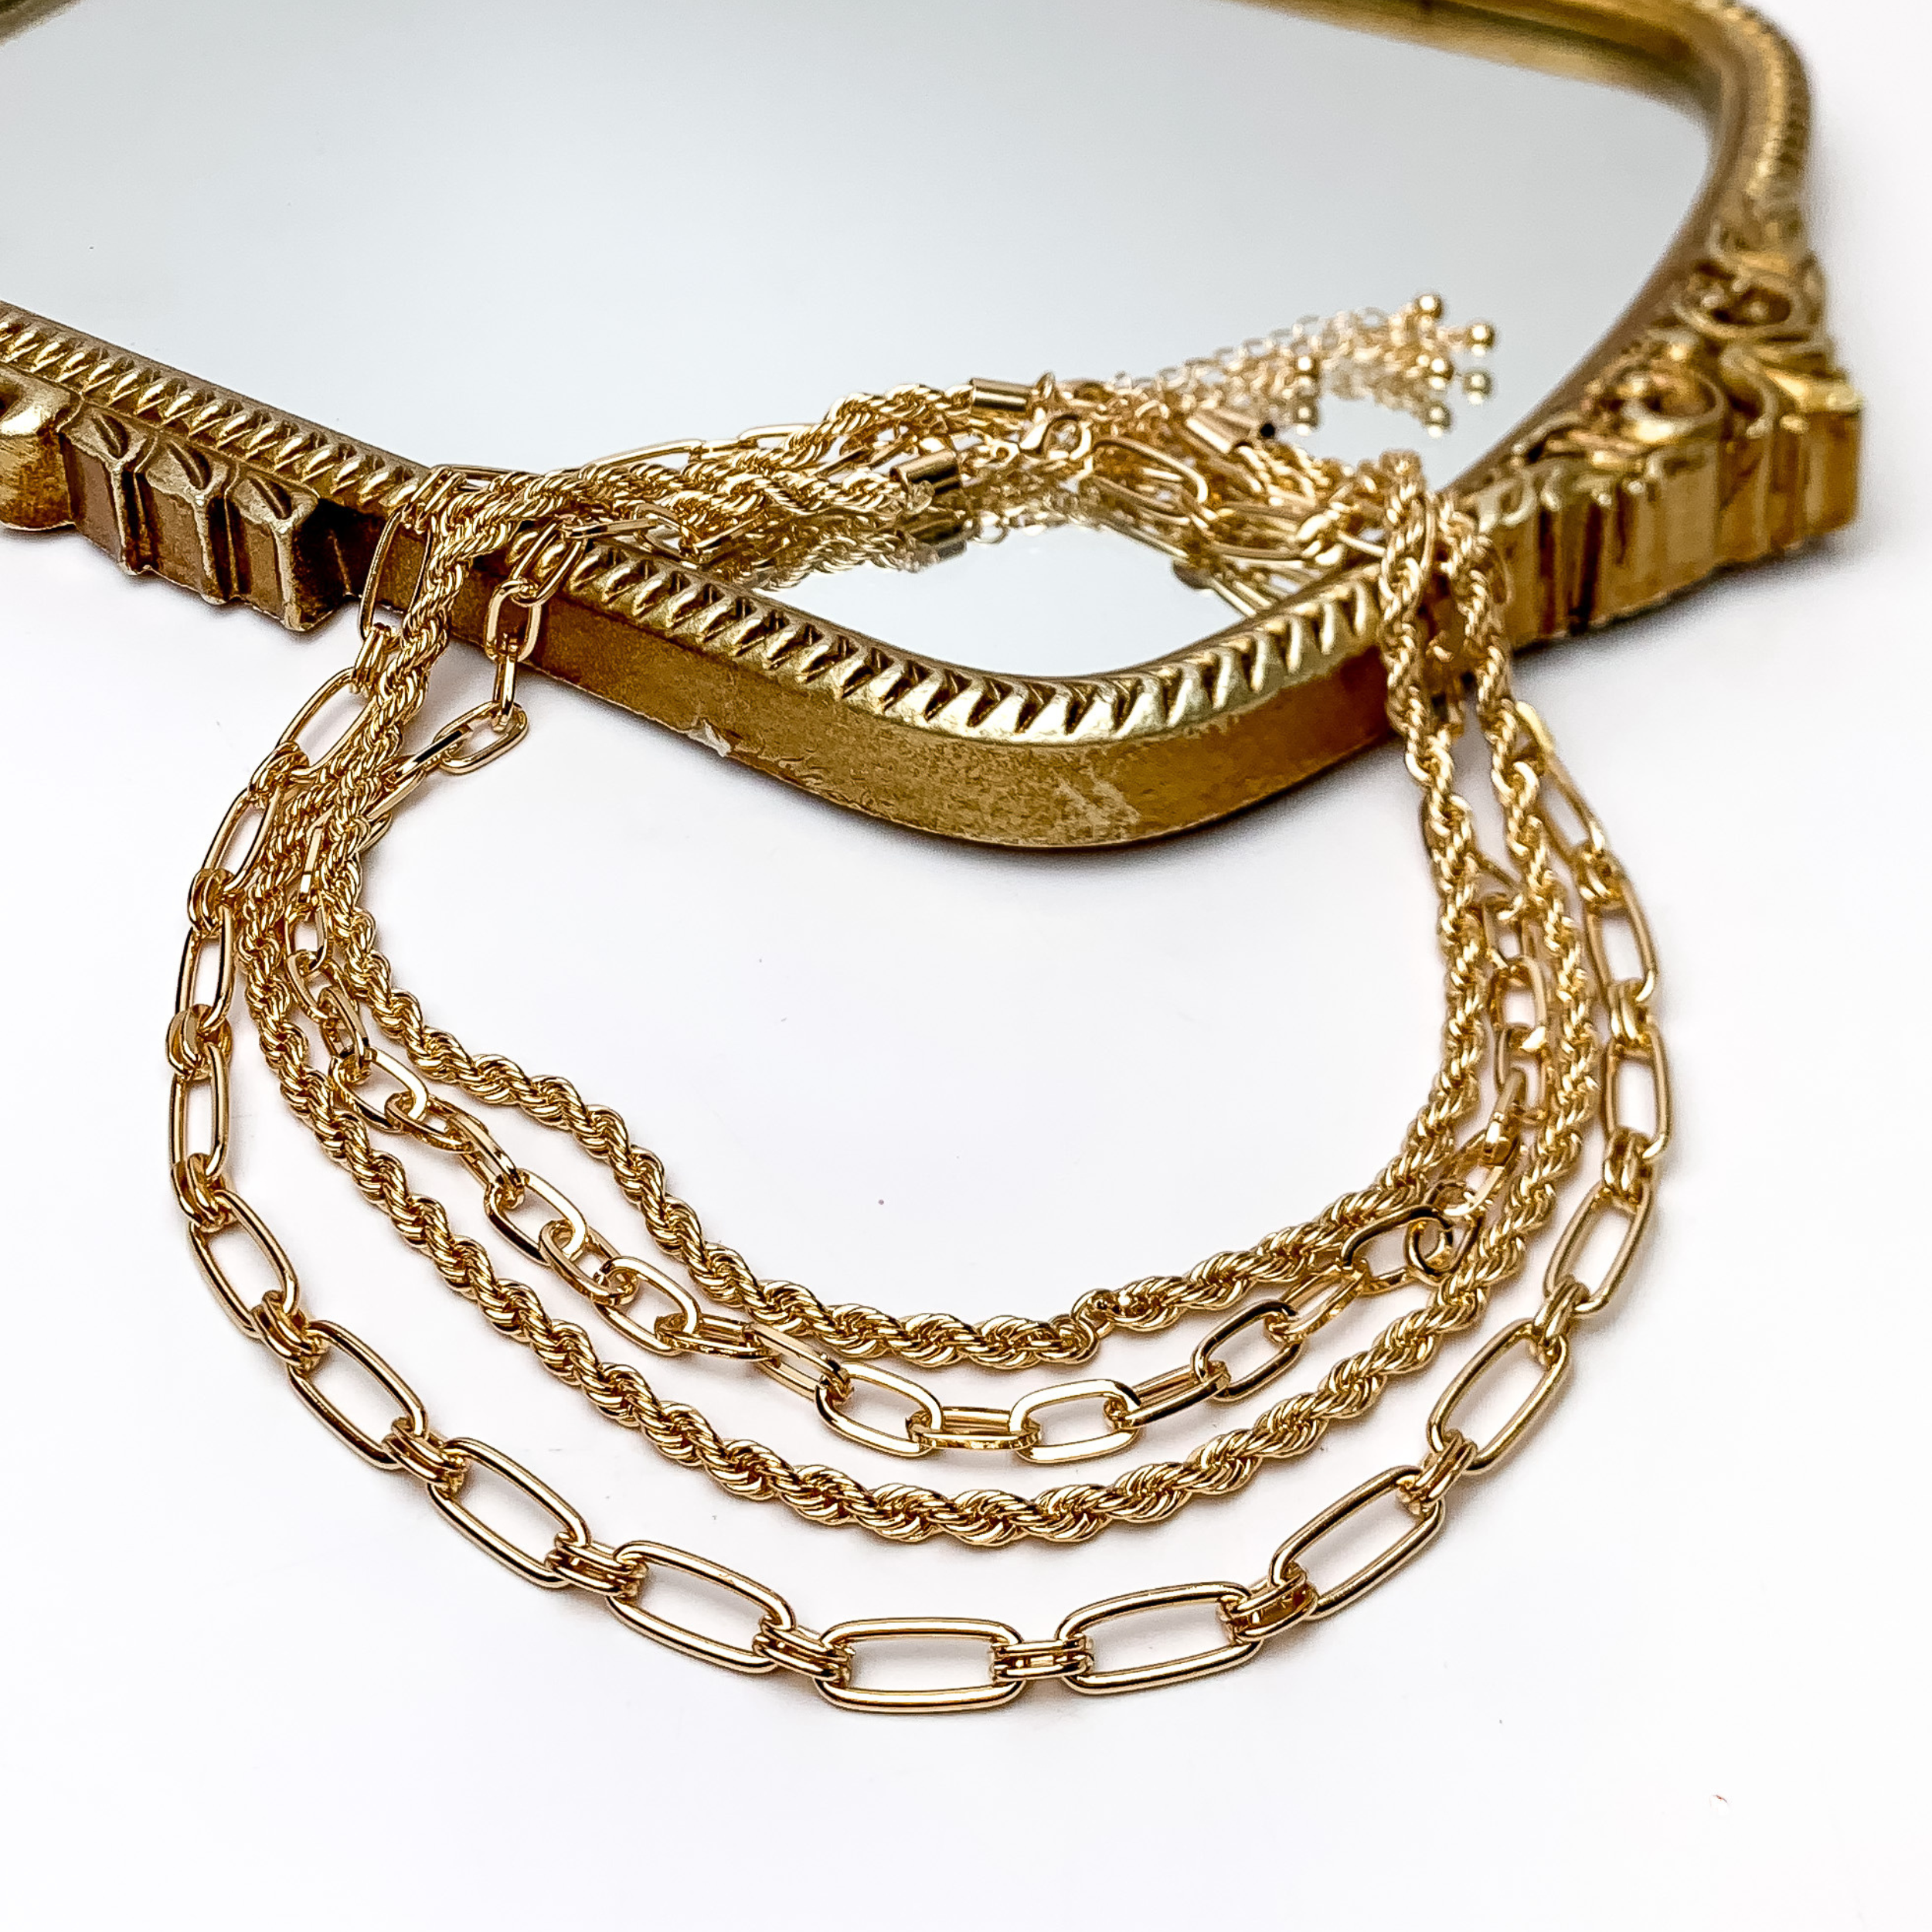 Sunday Style Gold Tone Chain Necklace. Pictured on a white background with part of the necklace on a gold framed mirror.